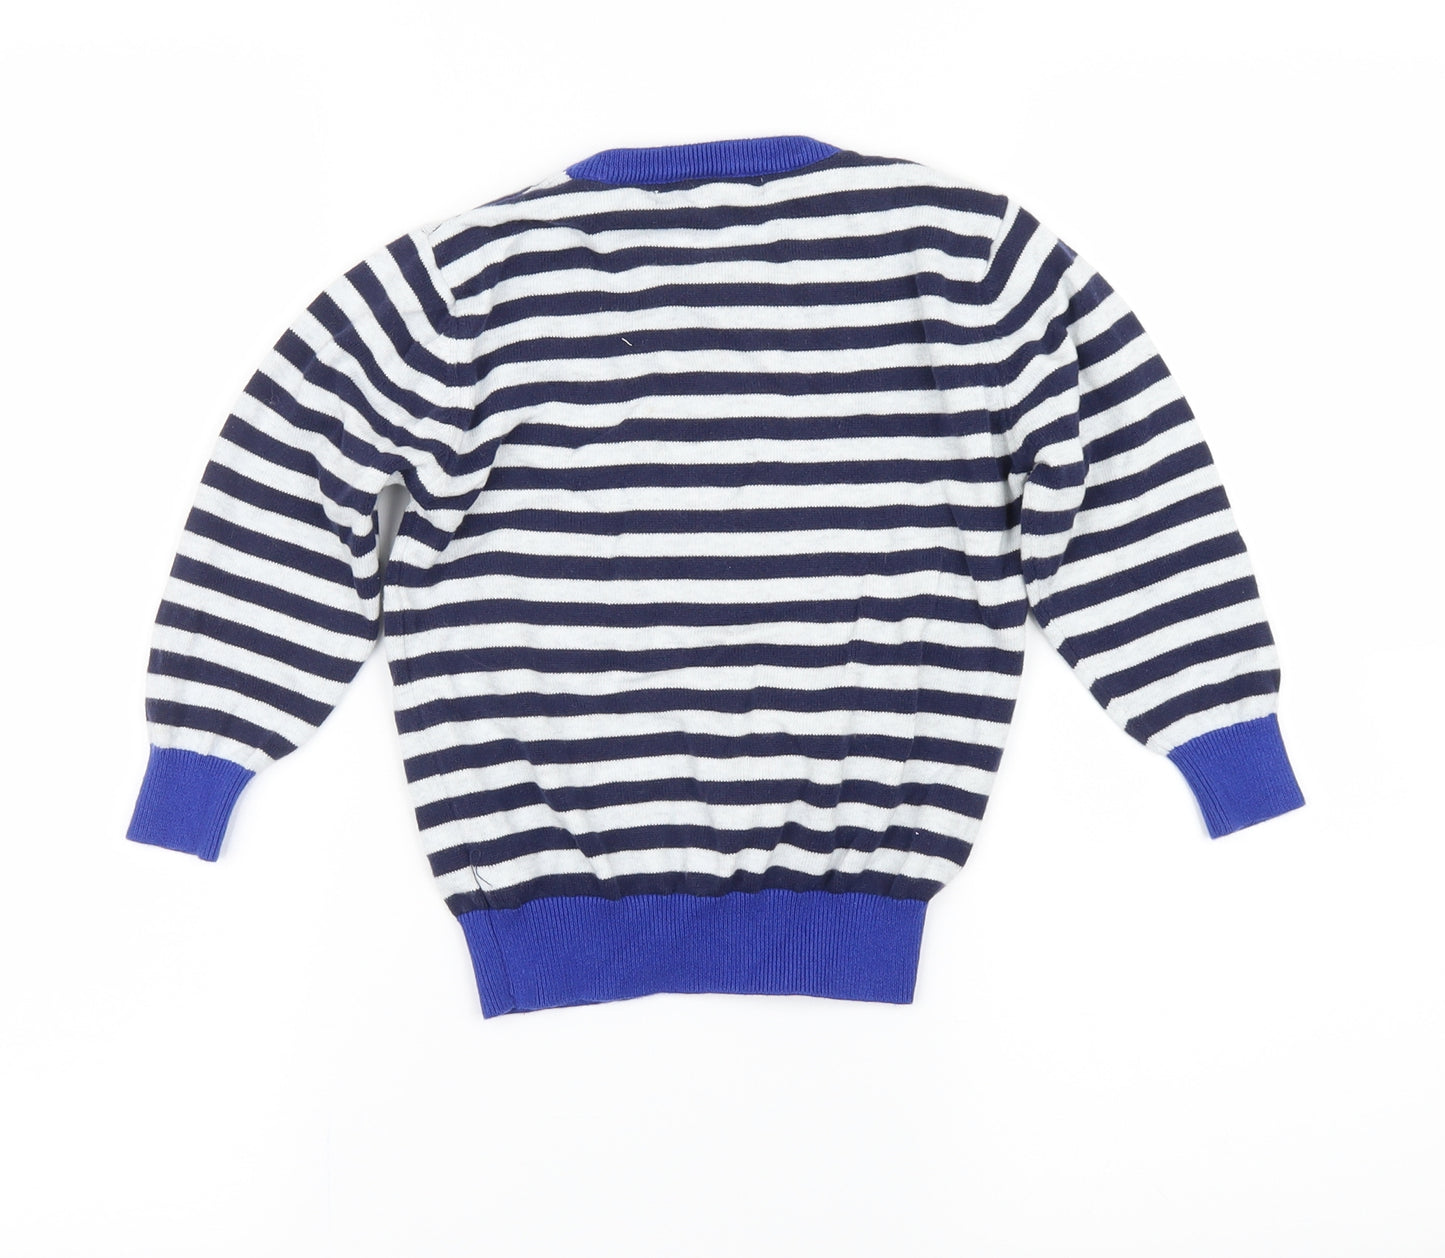 George Boys Blue Striped  Pullover Jumper Size 3-4 Years  - tractor